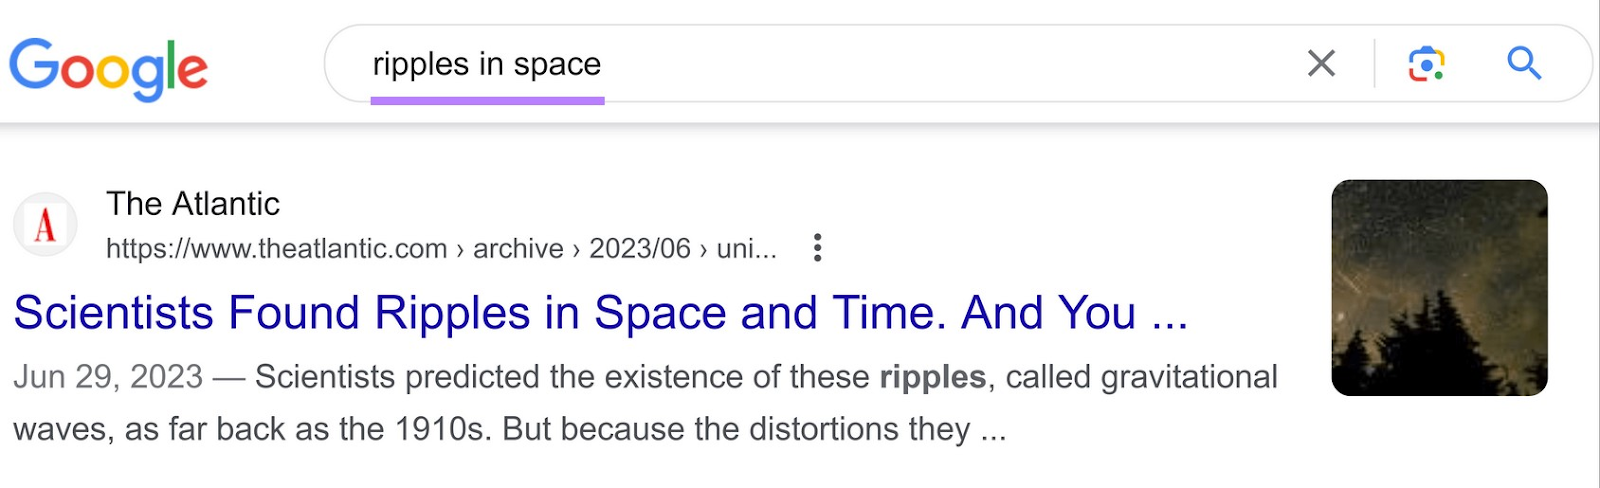 an article from The Atlantic is the first results in Google SERP for “ripples in ،e” query